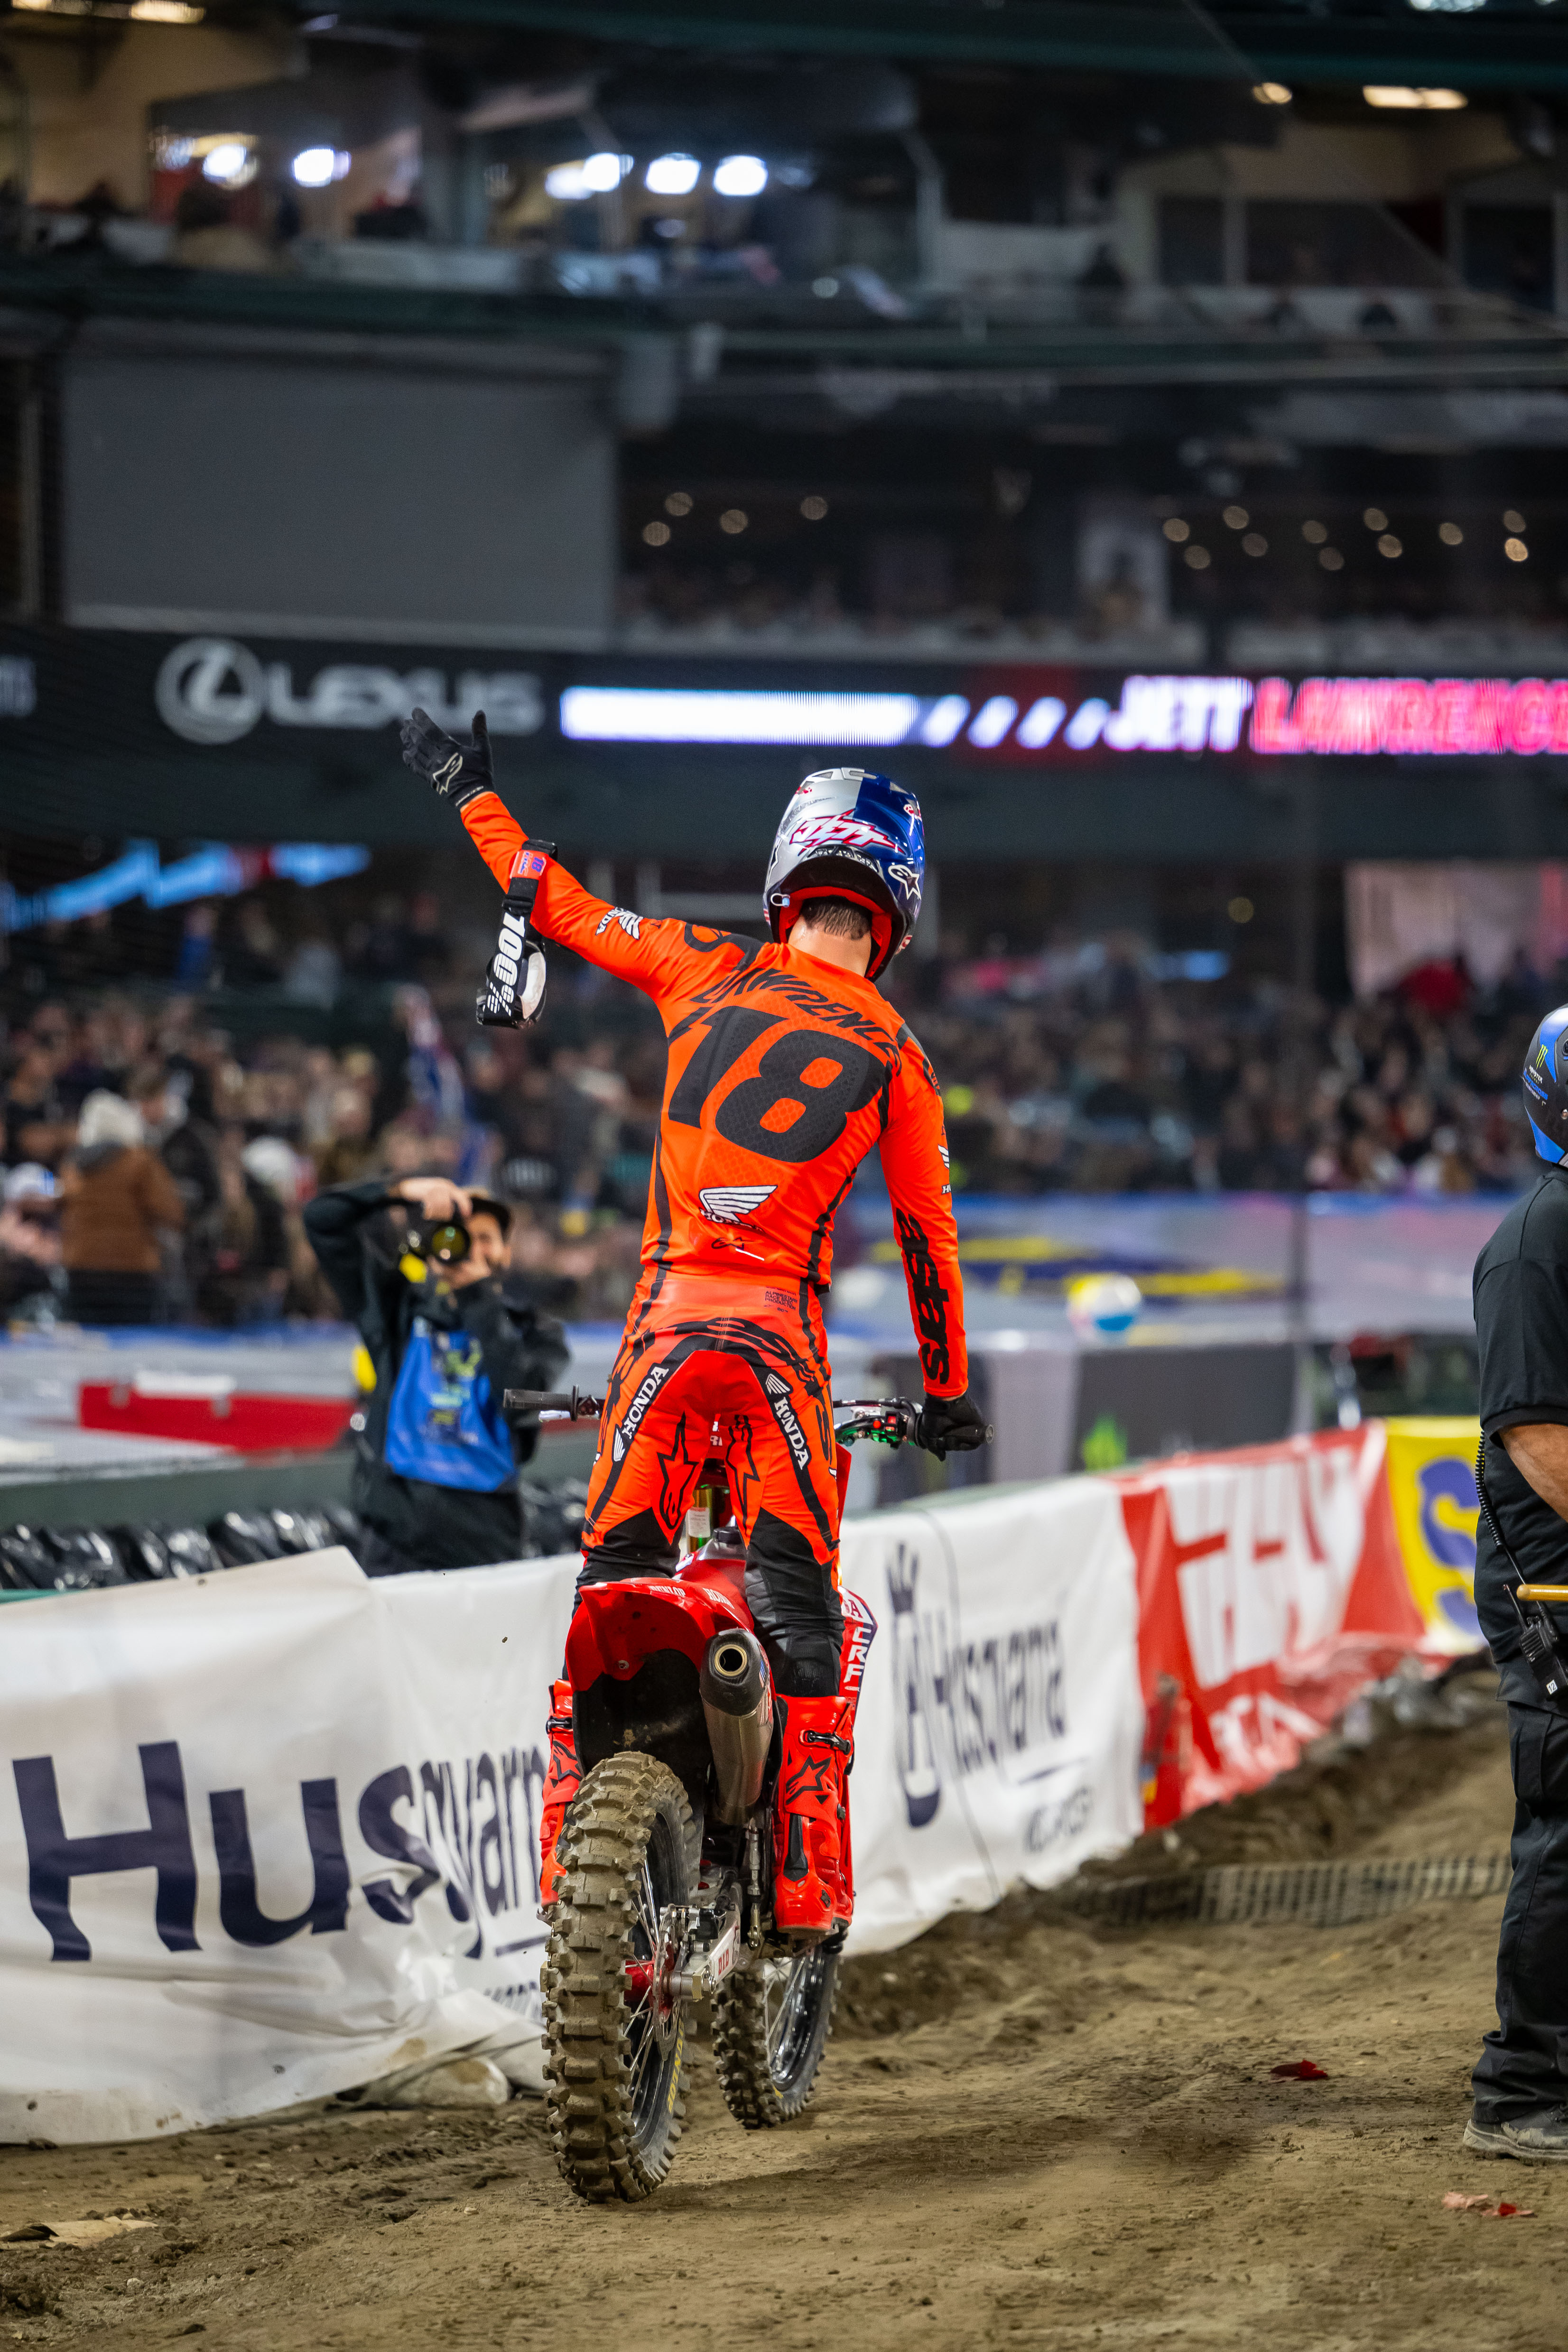 Jett Lawrence acknowledges the cheers from the adoring crowd after winning Sunday's final in Anaheim. Photo courtesy Align Media.